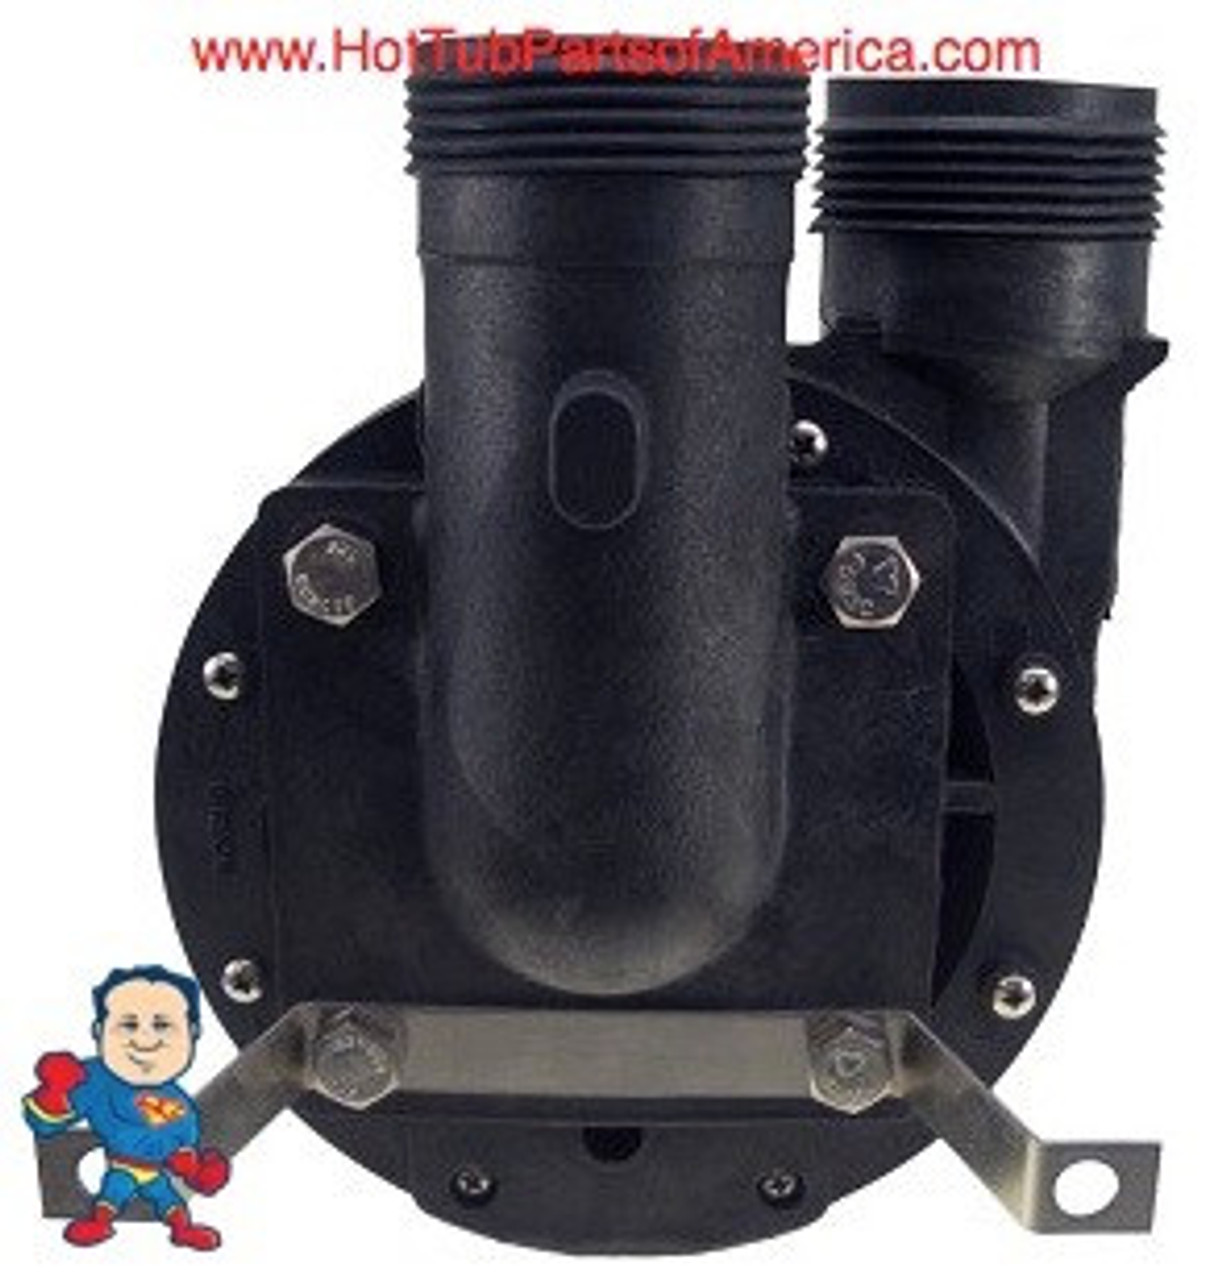 Wet End, Aqua-Flo, FMVP, 1.0HP, 1-1/2", 48 frame, 10-11A/115v Verticle Mount Pump 
The Suction and Pressure sides both Measure about 2-3/8" Across the threads and is called 1 ½”!
Also the suction side of this wet end can be used in any position you simply unscrew the four bolts in the front and turn it and tighten the bolts back in and you are done... Note: This is not a Circulation pump wet end it is only for Jet pumps with 10.0Amps or more on high speed at 115V...